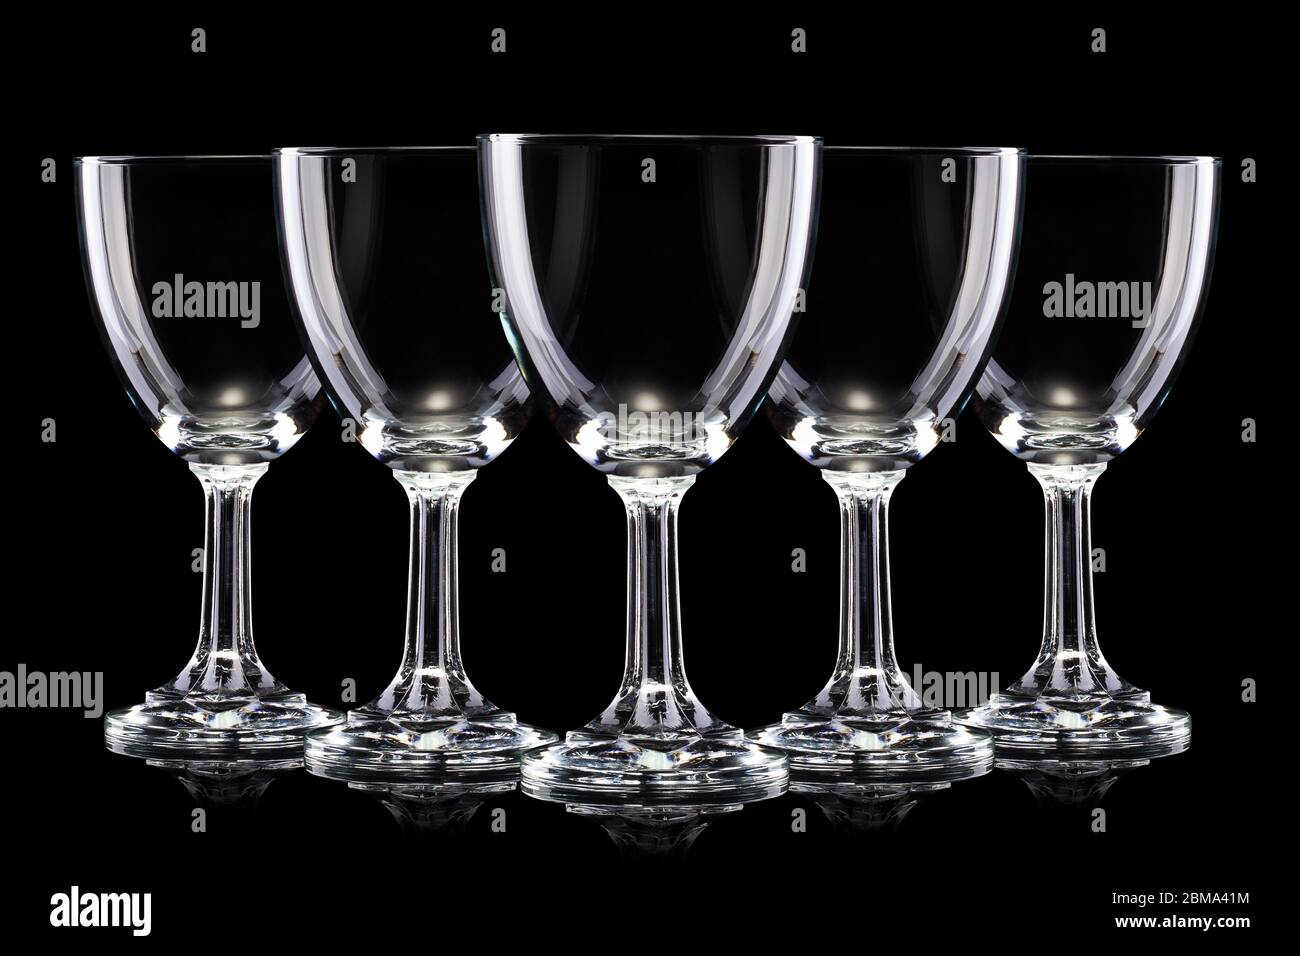 https://c8.alamy.com/comp/2BMA41M/set-of-empty-glasses-of-light-beer-with-foam-isolated-on-a-black-background-2BMA41M.jpg